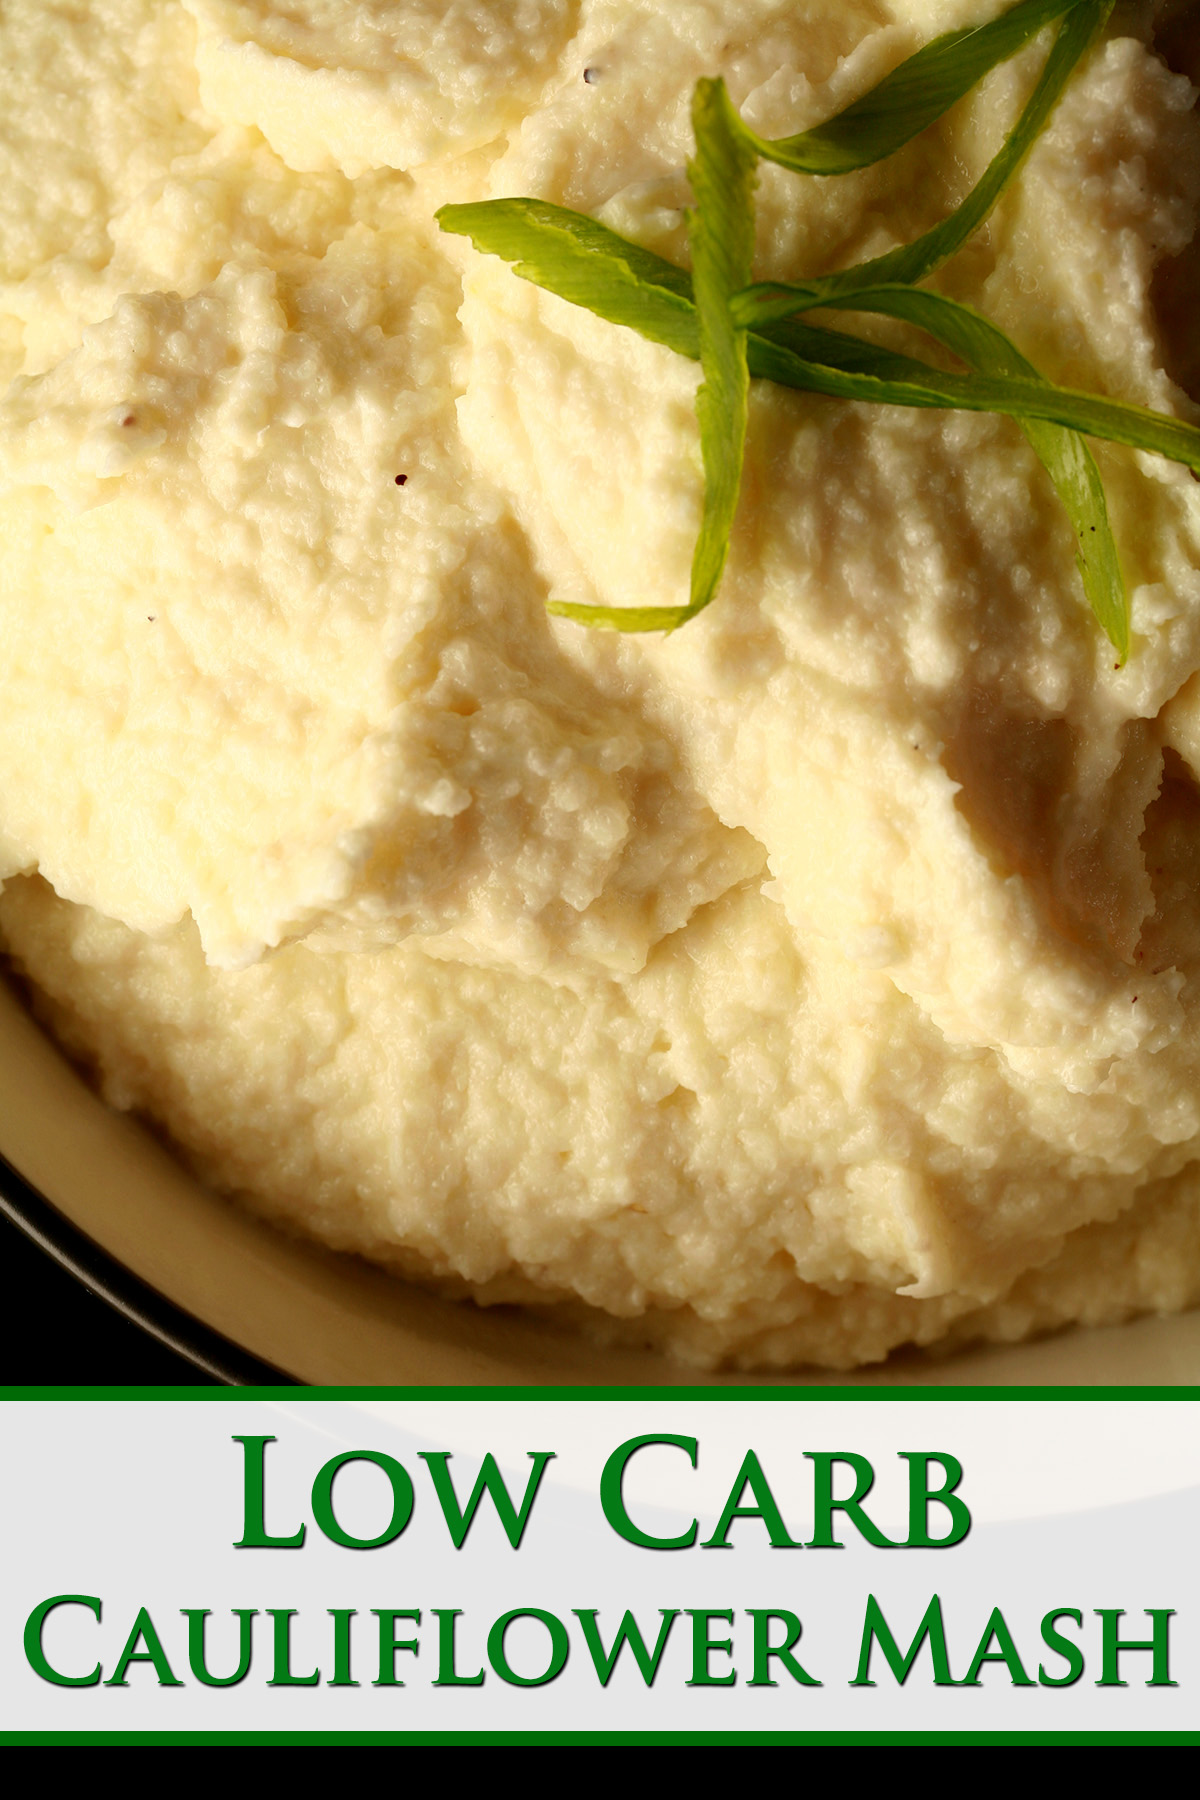 A close up view of a bowl of keto cauliflower mash, with sliced green onions on top. Green text overlay says low carb cauliflower mash.